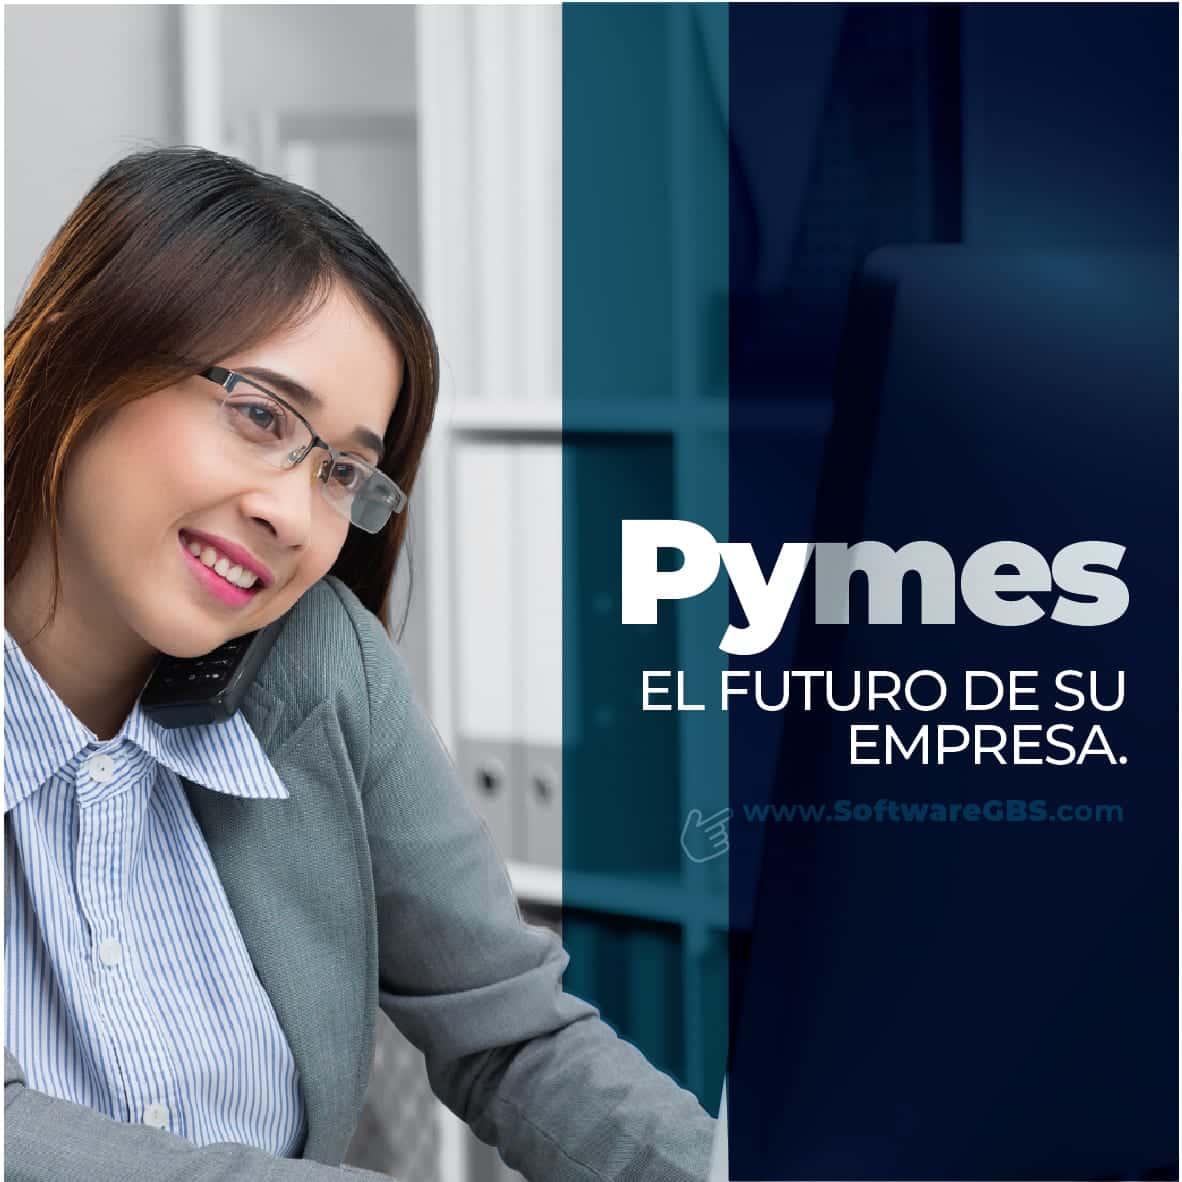 Software Contable Pymes - Software GBS